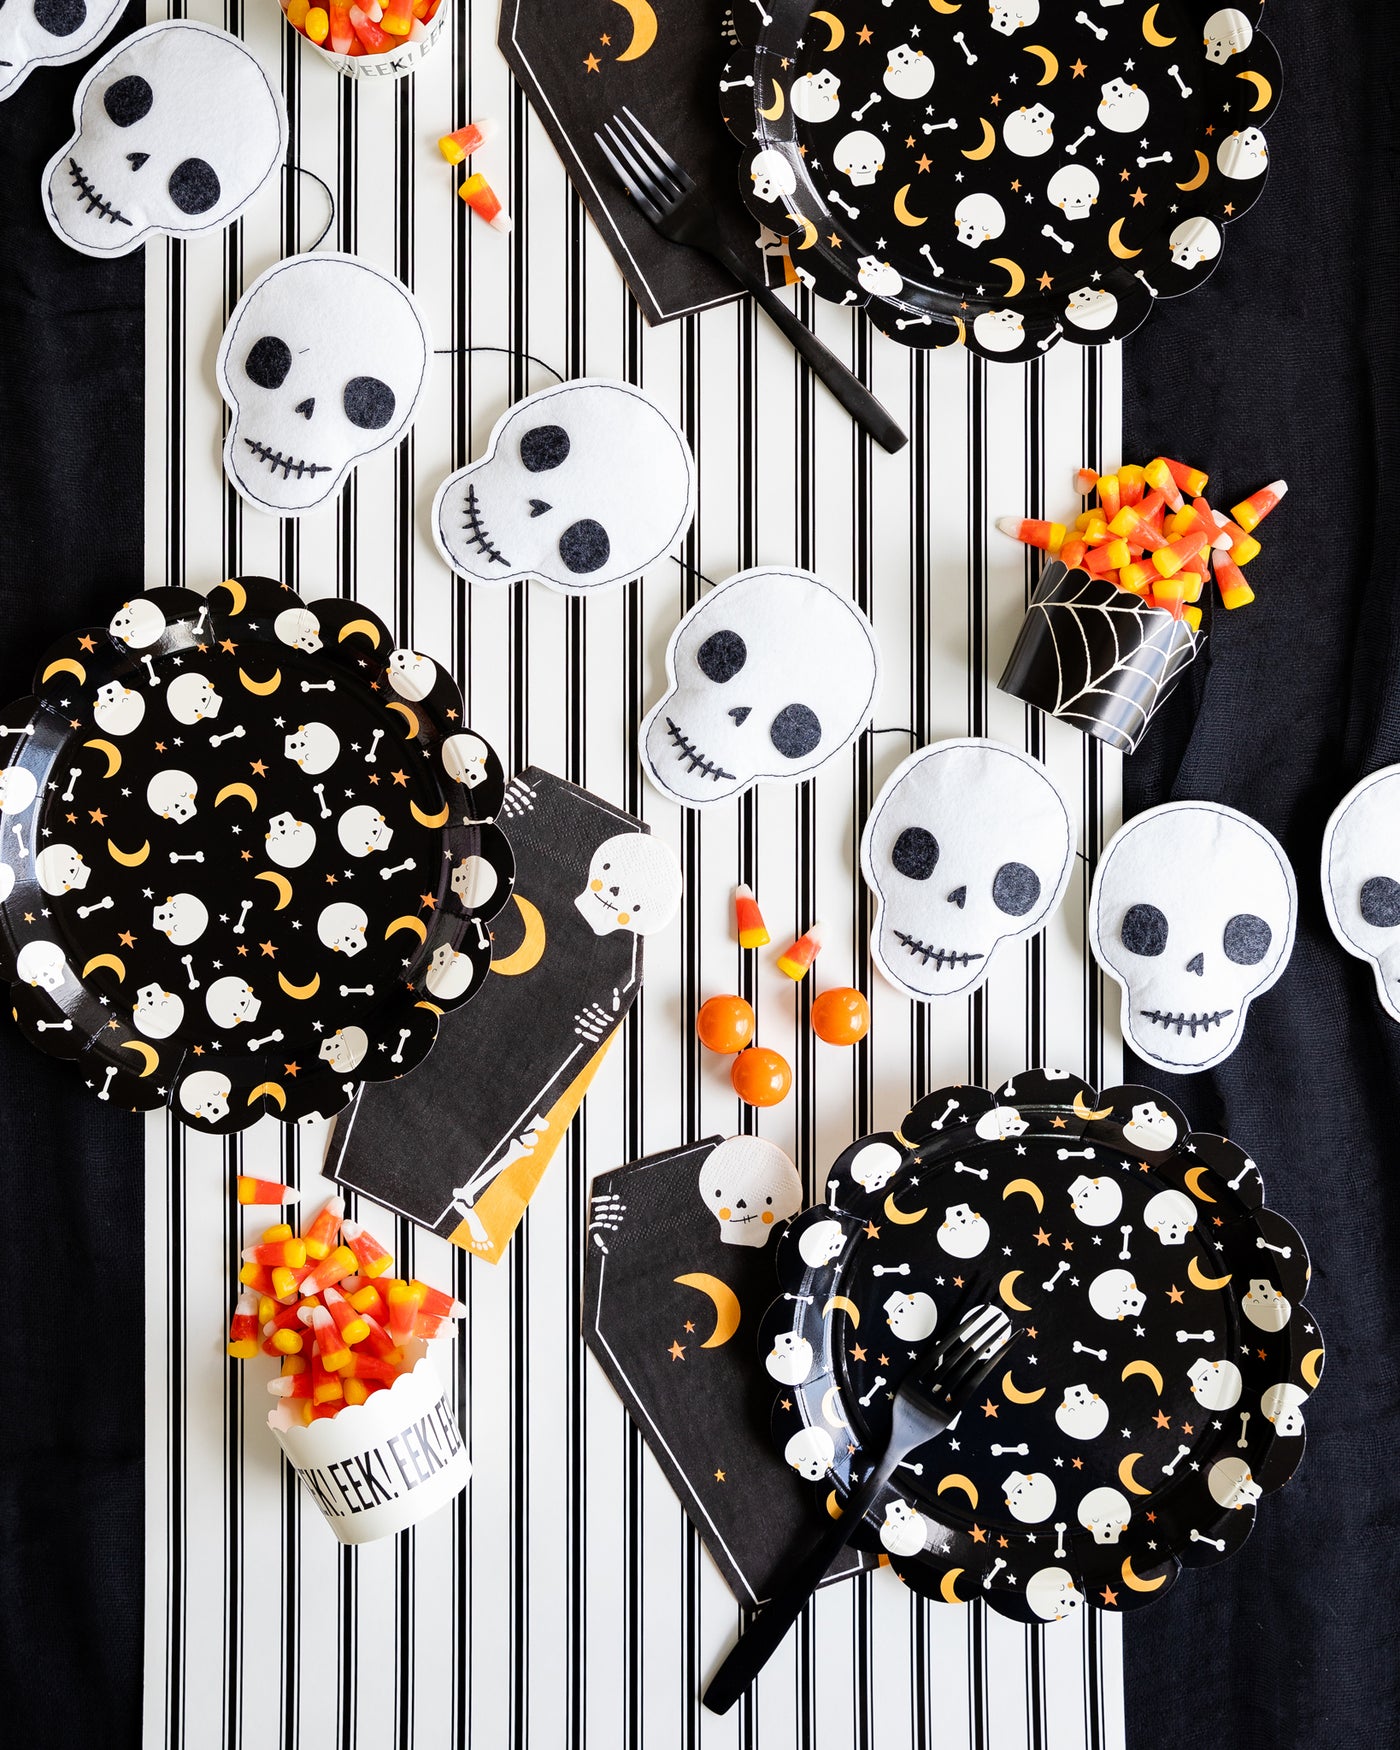 Skeleton Decor and Tabletop Collection